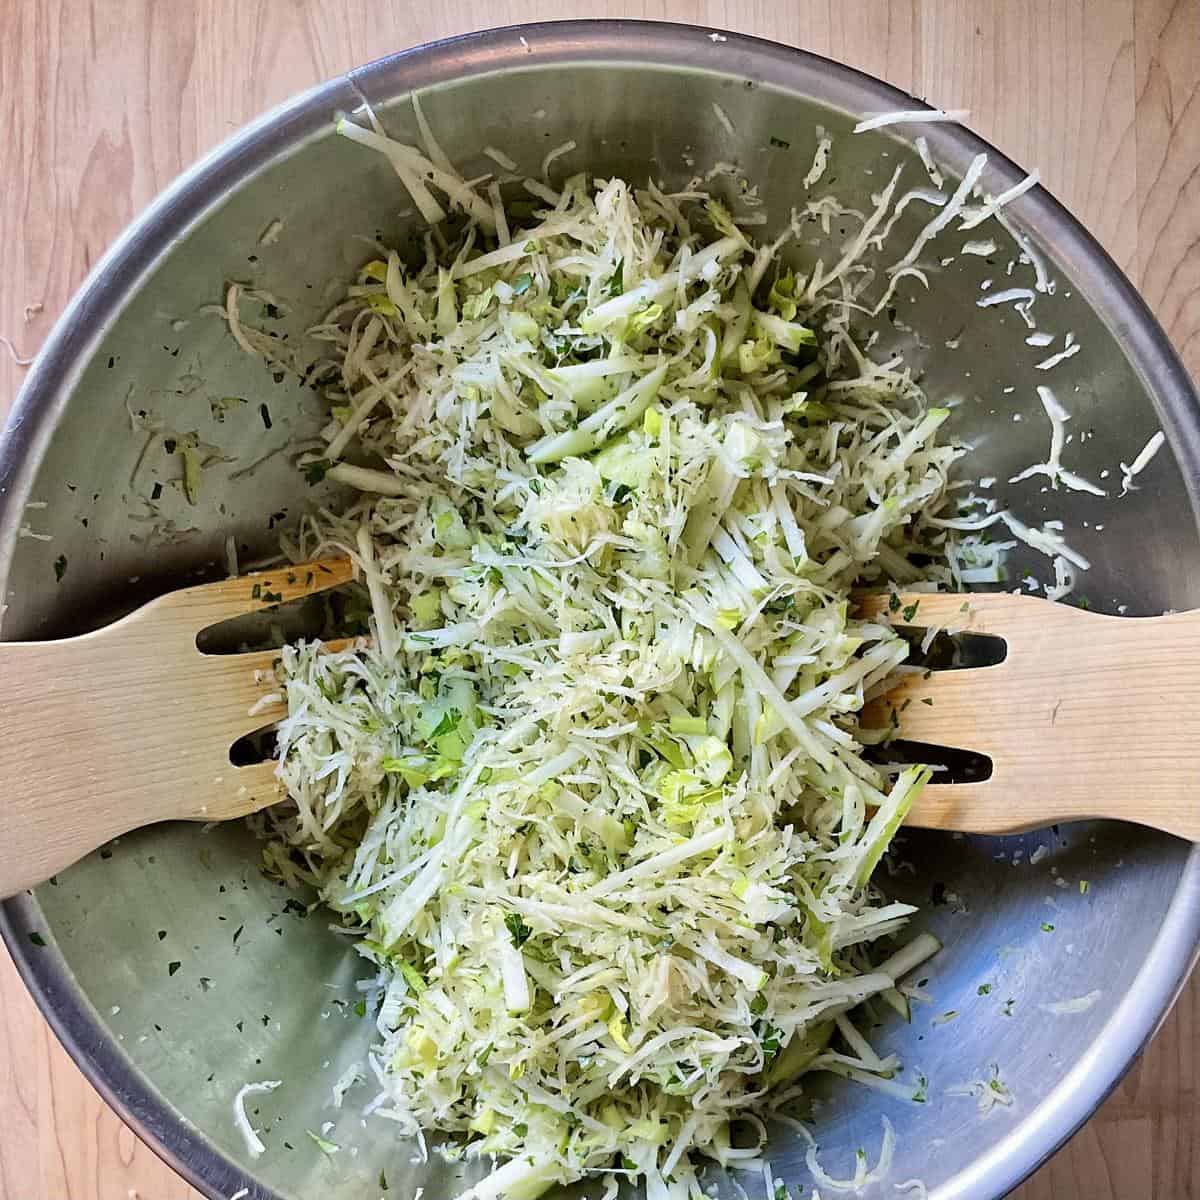 The ingredients to make a celery root salad are tossed together in a mixing bowl.